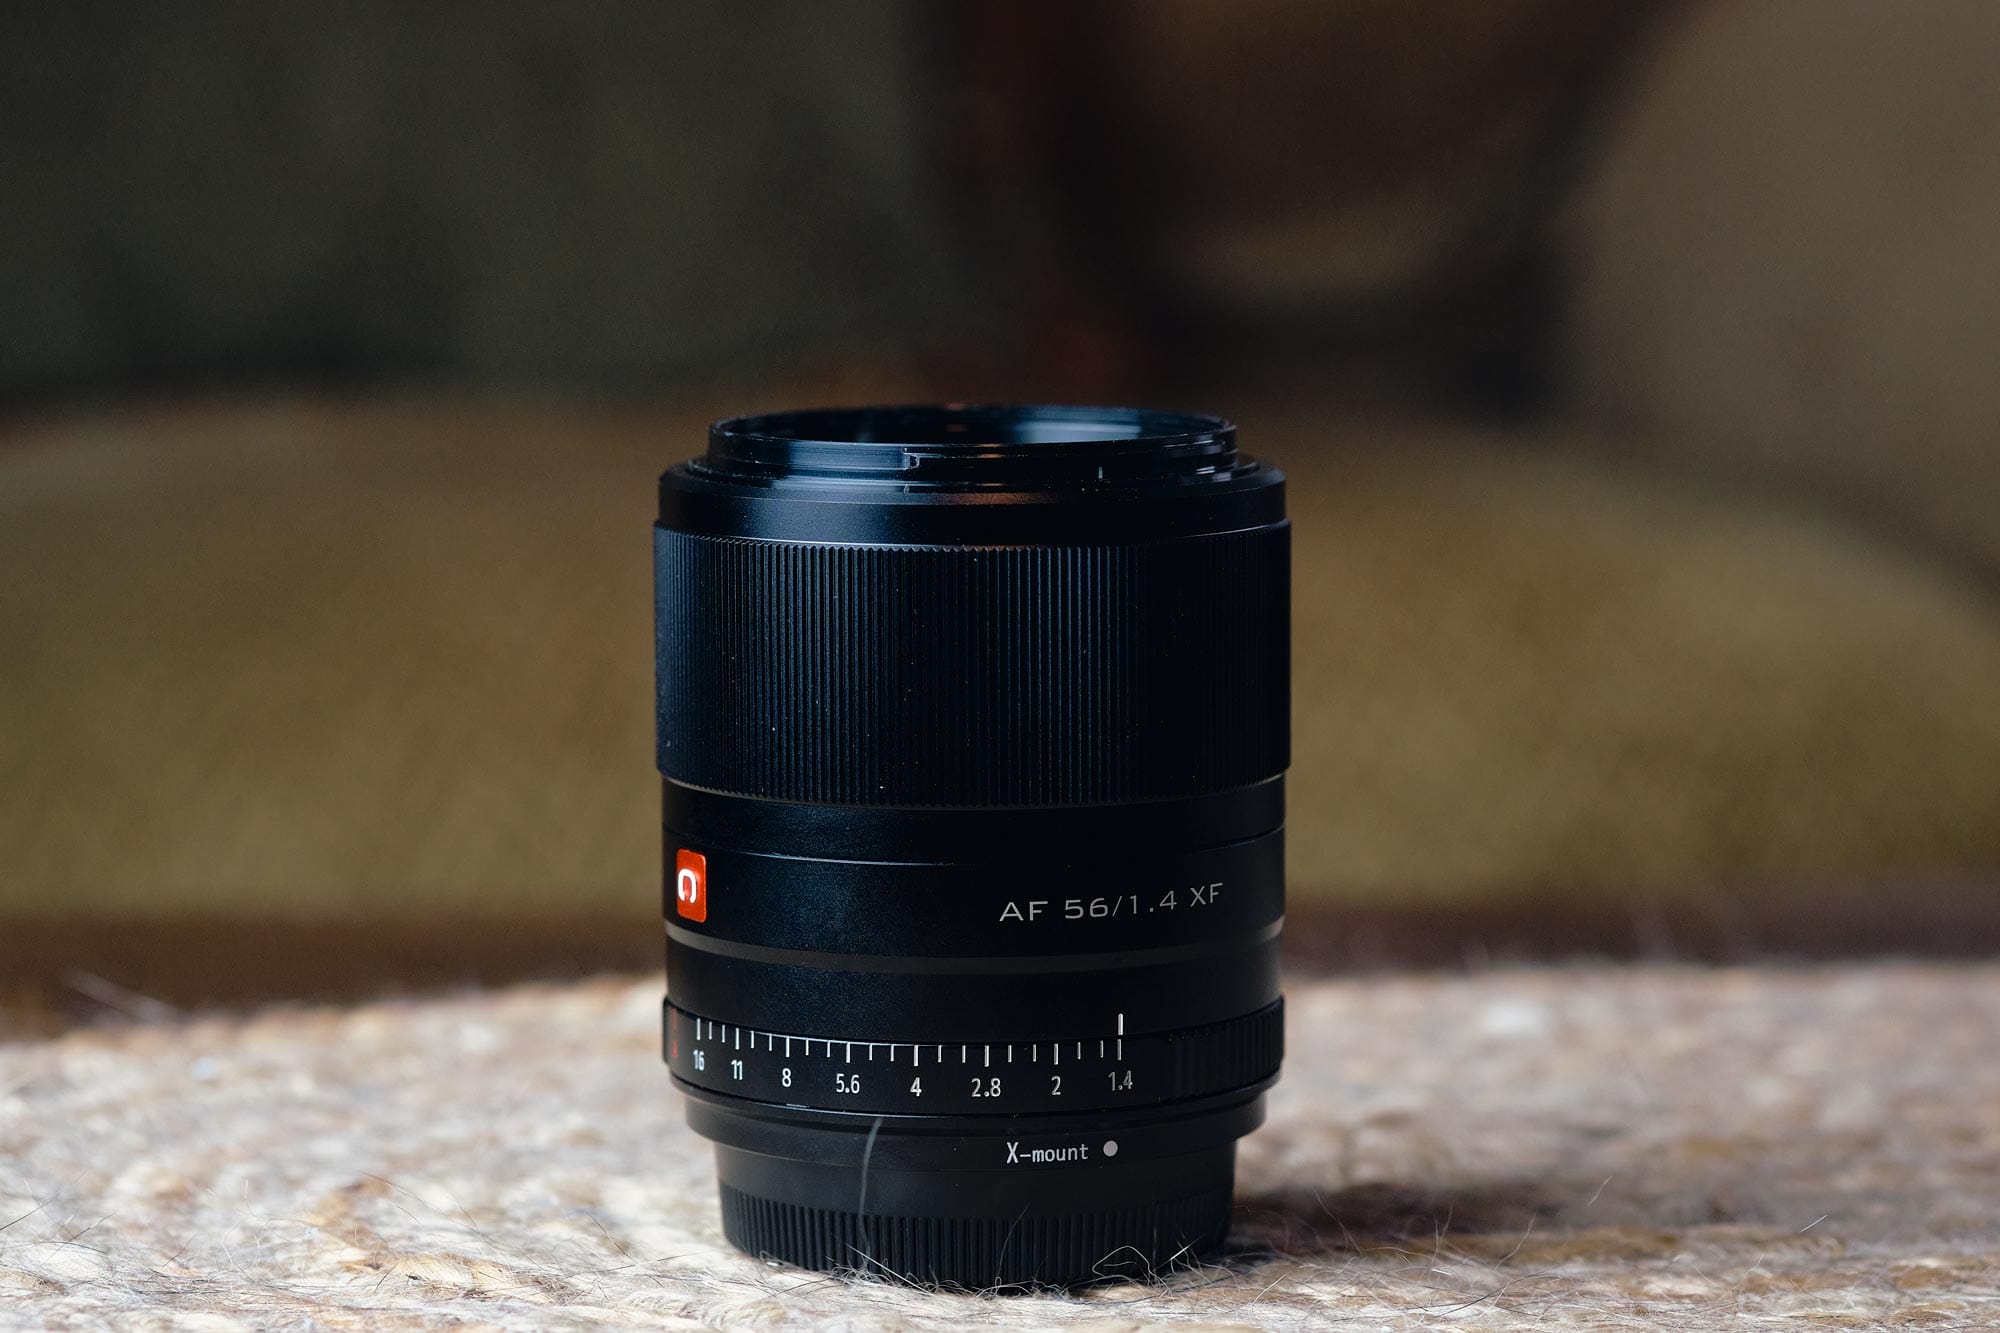 Featured image of the Viltrox 56mm f/1.4 XF for Fujifilm